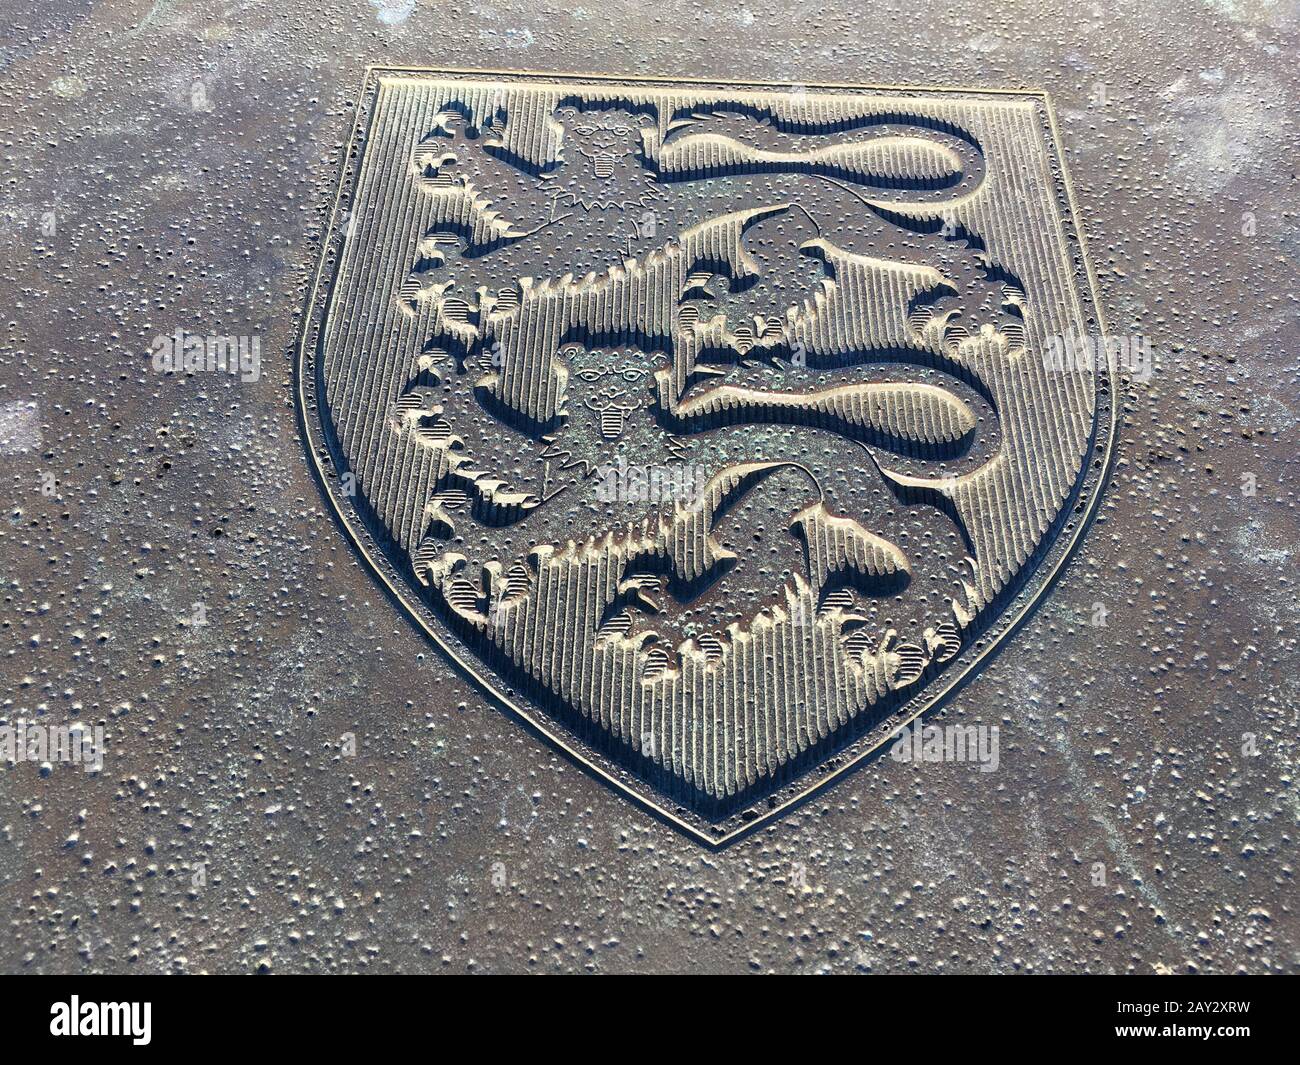 it's a photo of the normand crest or coat of arms  on the ground in the street or pavement. It has the 2 lions or leopard shapes Stock Photo